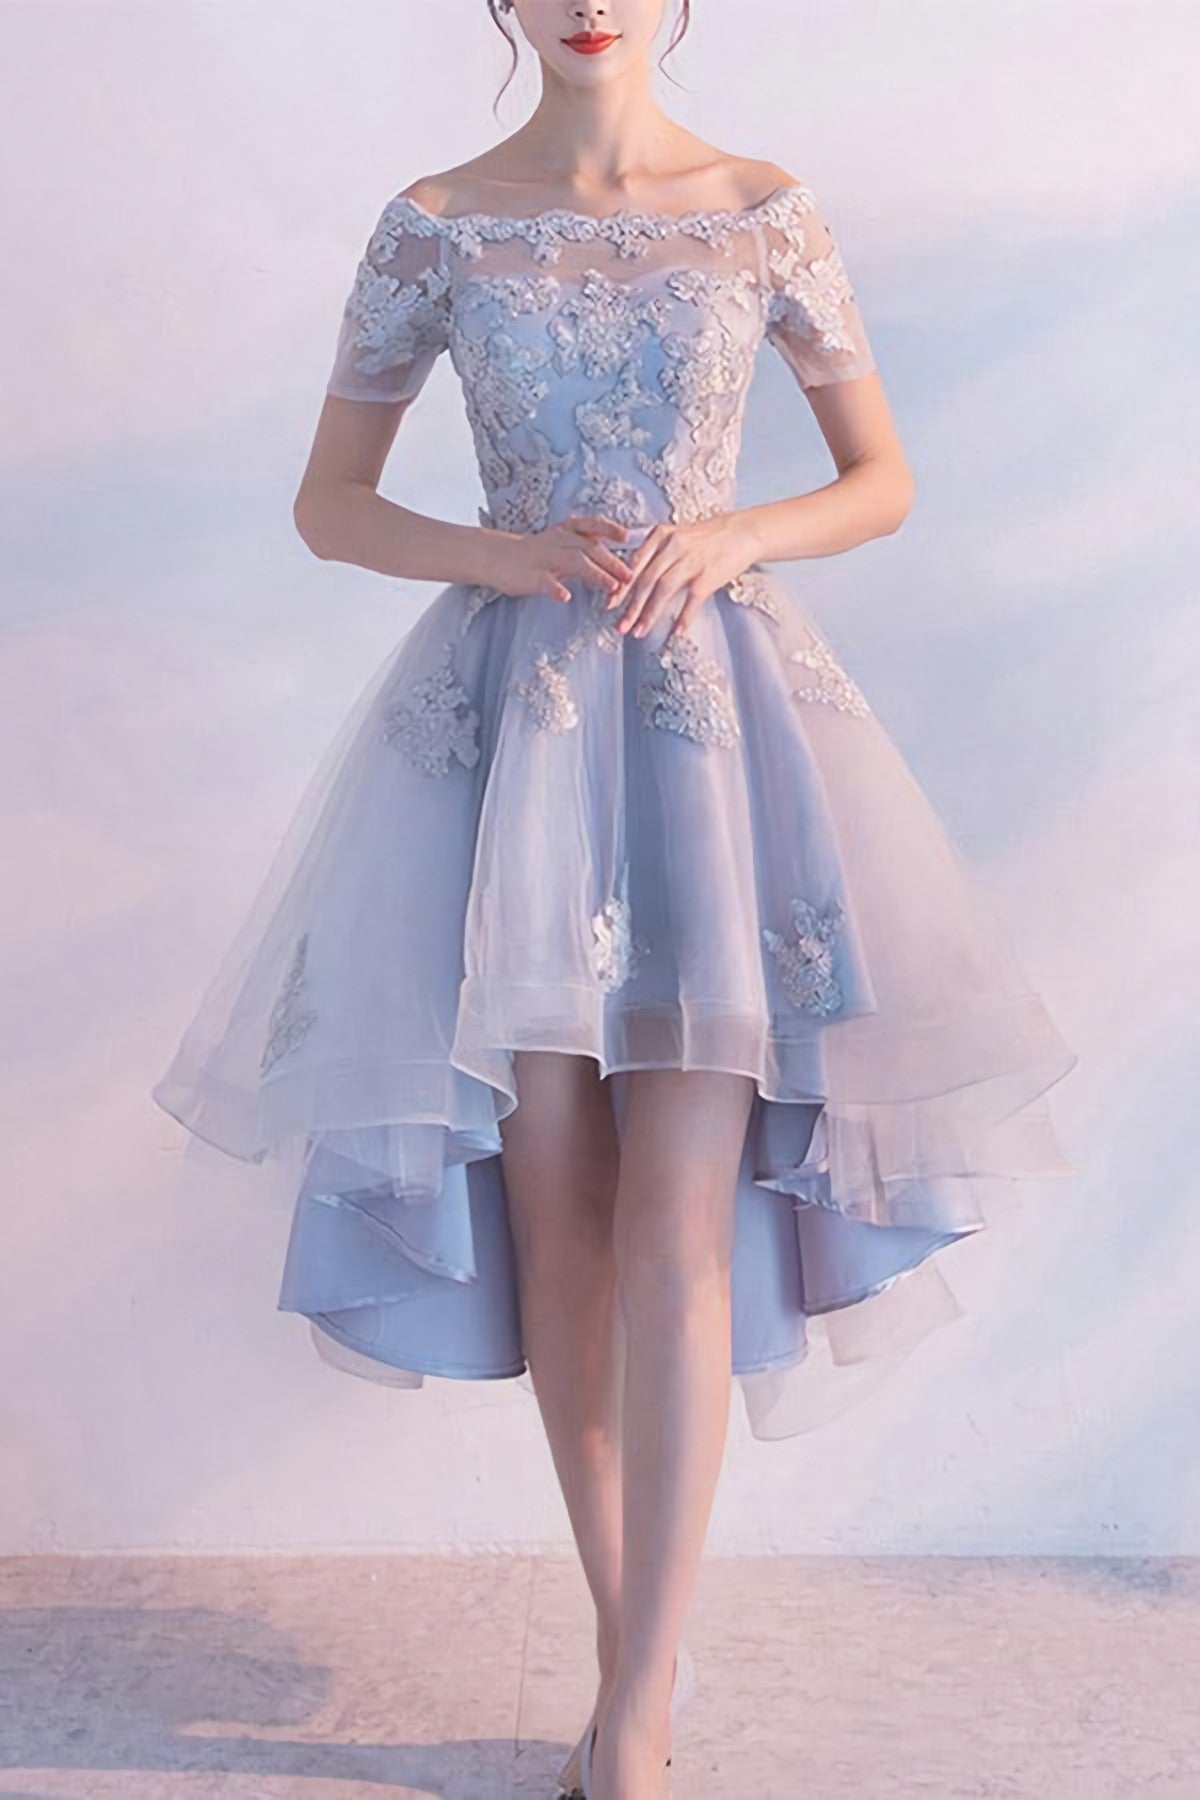 Off The Shoulder Dusty Blue High Low Corset Homecoming Dress Tulle Short Cocktail Dresses outfit, Elegant Dress Classy